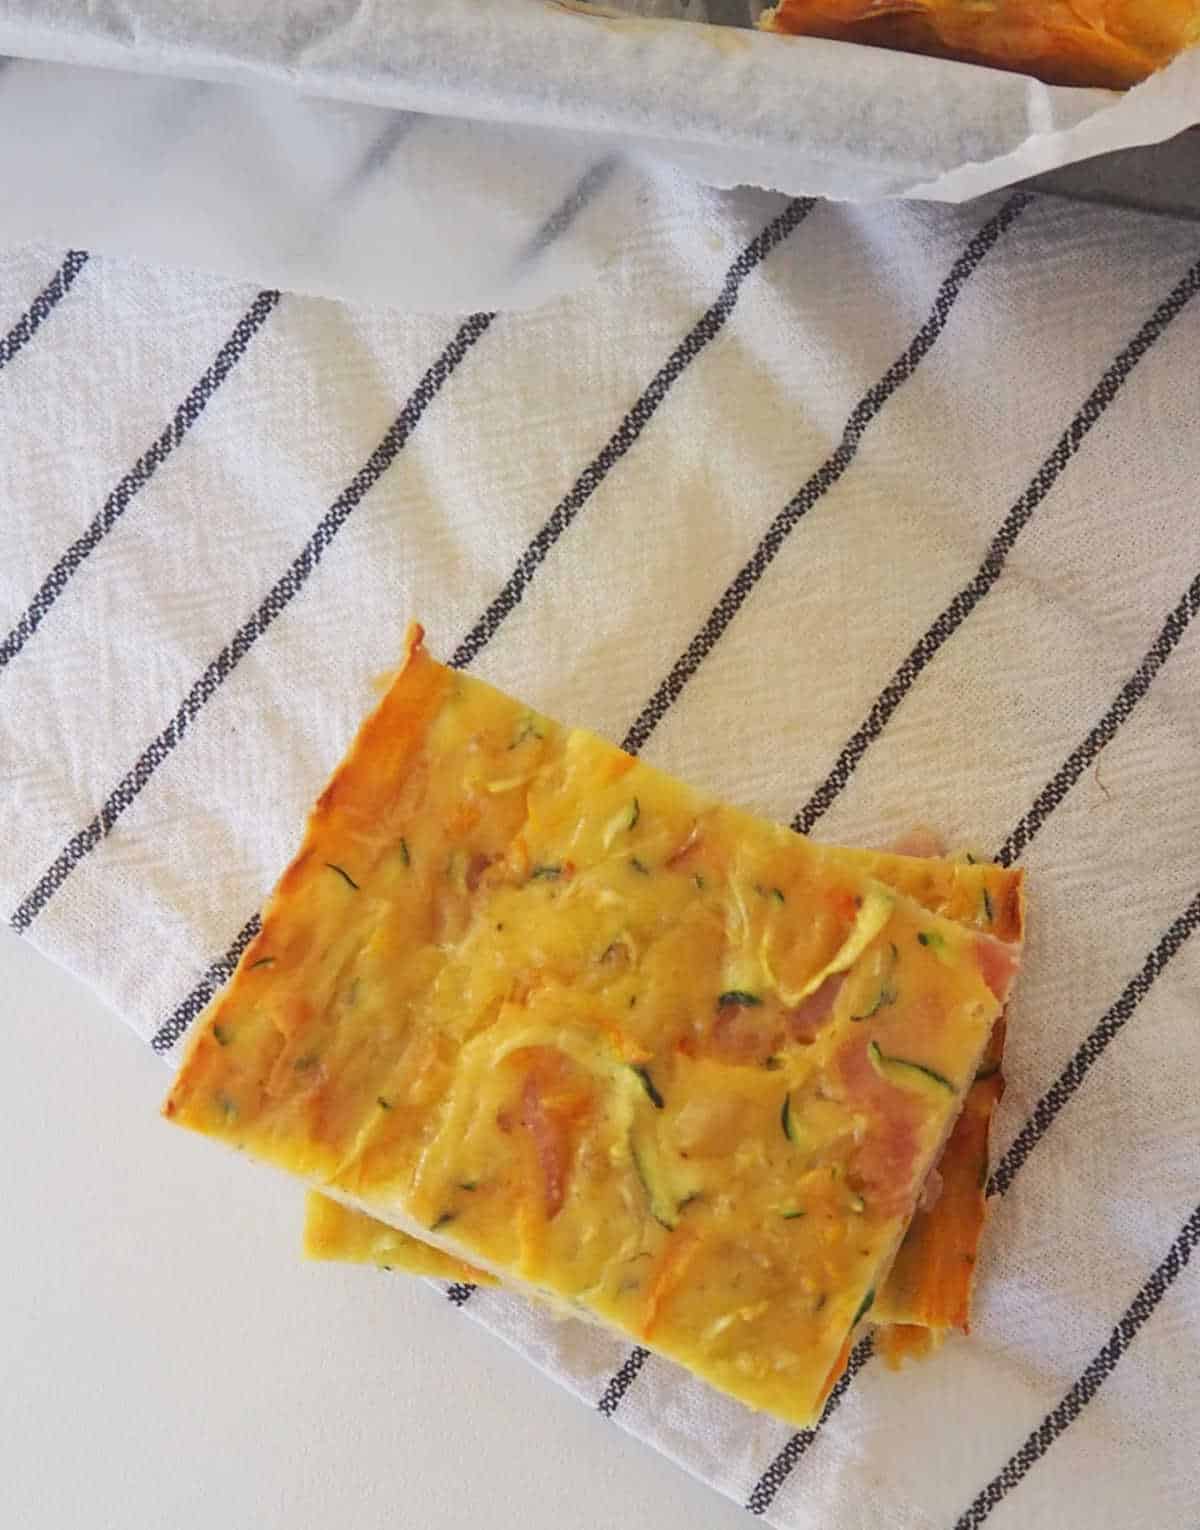 Two pieces of zucchini slice sitting on white and blue striped tea towel.